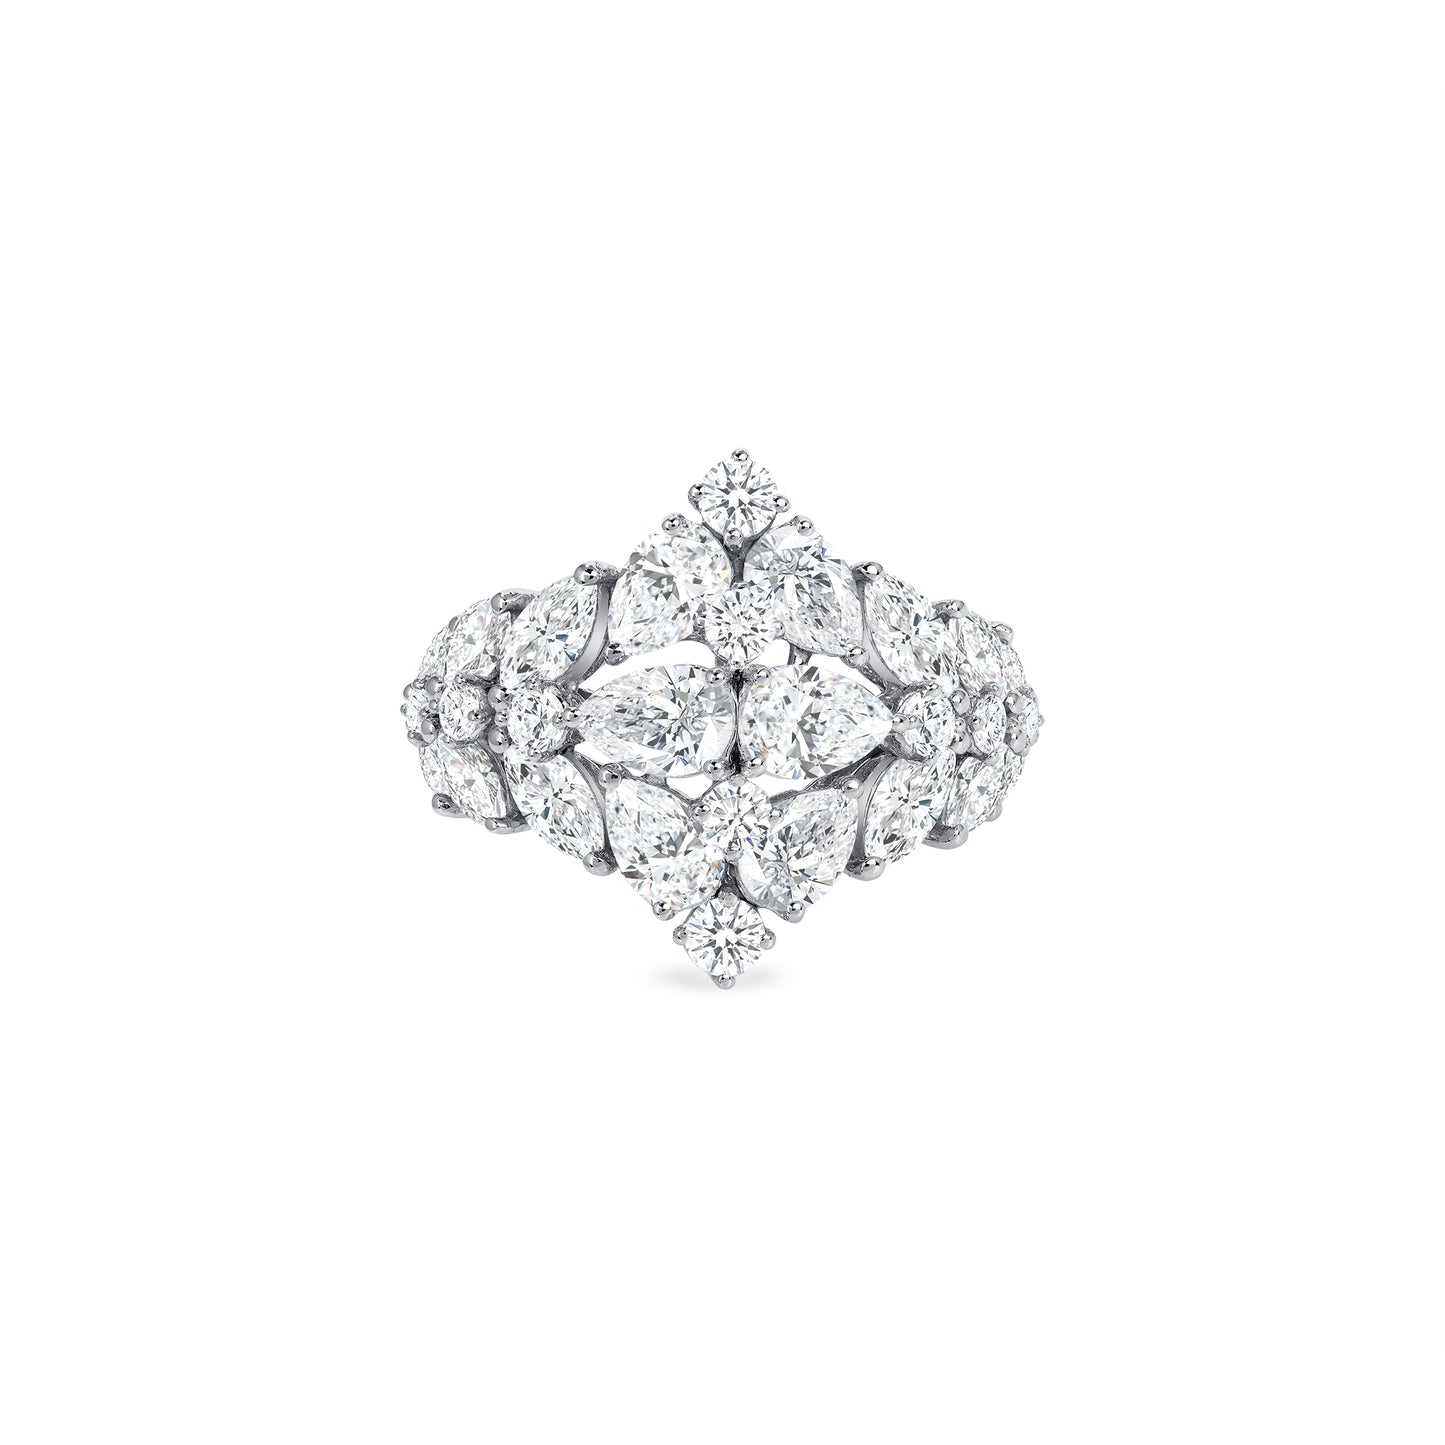 The Mirrored Pear Diamond Cocktail Ring